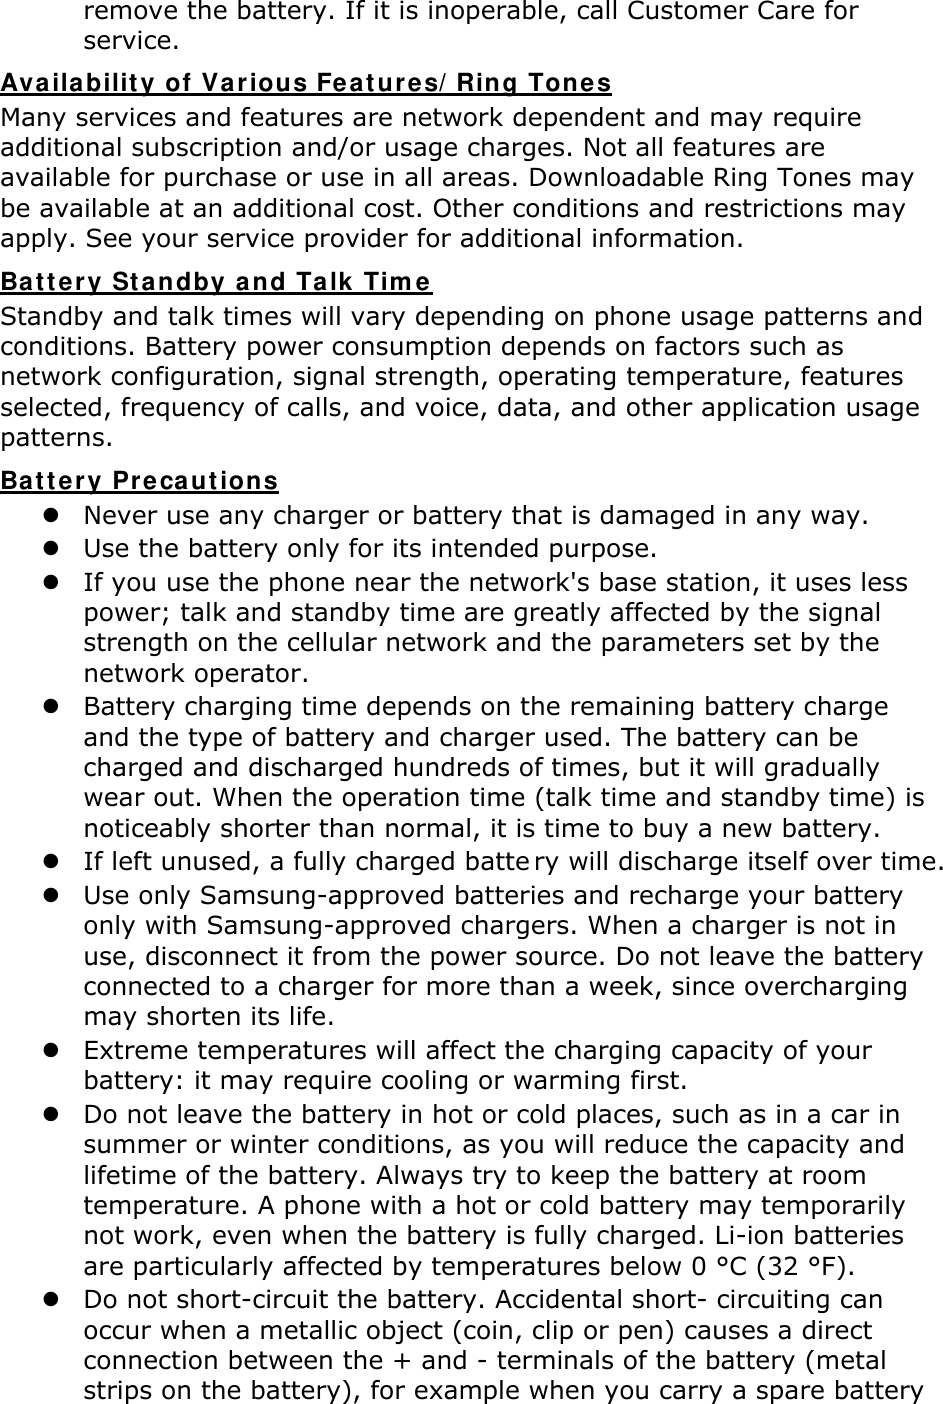 remove the battery. If it is inoperable, call Customer Care for service. Availability of Various Features/Ring Tones Many services and features are network dependent and may require additional subscription and/or usage charges. Not all features are available for purchase or use in all areas. Downloadable Ring Tones may be available at an additional cost. Other conditions and restrictions may apply. See your service provider for additional information. Battery Standby and Talk Time Standby and talk times will vary depending on phone usage patterns and conditions. Battery power consumption depends on factors such as network configuration, signal strength, operating temperature, features selected, frequency of calls, and voice, data, and other application usage patterns.   Battery Precautions  Never use any charger or battery that is damaged in any way.  Use the battery only for its intended purpose.  If you use the phone near the network&apos;s base station, it uses less power; talk and standby time are greatly affected by the signal strength on the cellular network and the parameters set by the network operator.  Battery charging time depends on the remaining battery charge and the type of battery and charger used. The battery can be charged and discharged hundreds of times, but it will gradually wear out. When the operation time (talk time and standby time) is noticeably shorter than normal, it is time to buy a new battery.  If left unused, a fully charged batte ry will discharge itself over time.   Use only Samsung-approved batteries and recharge your battery only with Samsung-approved chargers. When a charger is not in use, disconnect it from the power source. Do not leave the battery connected to a charger for more than a week, since overcharging may shorten its life.  Extreme temperatures will affect the charging capacity of your battery: it may require cooling or warming first.  Do not leave the battery in hot or cold places, such as in a car in summer or winter conditions, as you will reduce the capacity and lifetime of the battery. Always try to keep the battery at room temperature. A phone with a hot or cold battery may temporarily not work, even when the battery is fully charged. Li-ion batteries are particularly affected by temperatures below 0 °C (32 °F).  Do not short-circuit the battery. Accidental short- circuiting can occur when a metallic object (coin, clip or pen) causes a direct connection between the + and - terminals of the battery (metal strips on the battery), for example when you carry a spare battery 